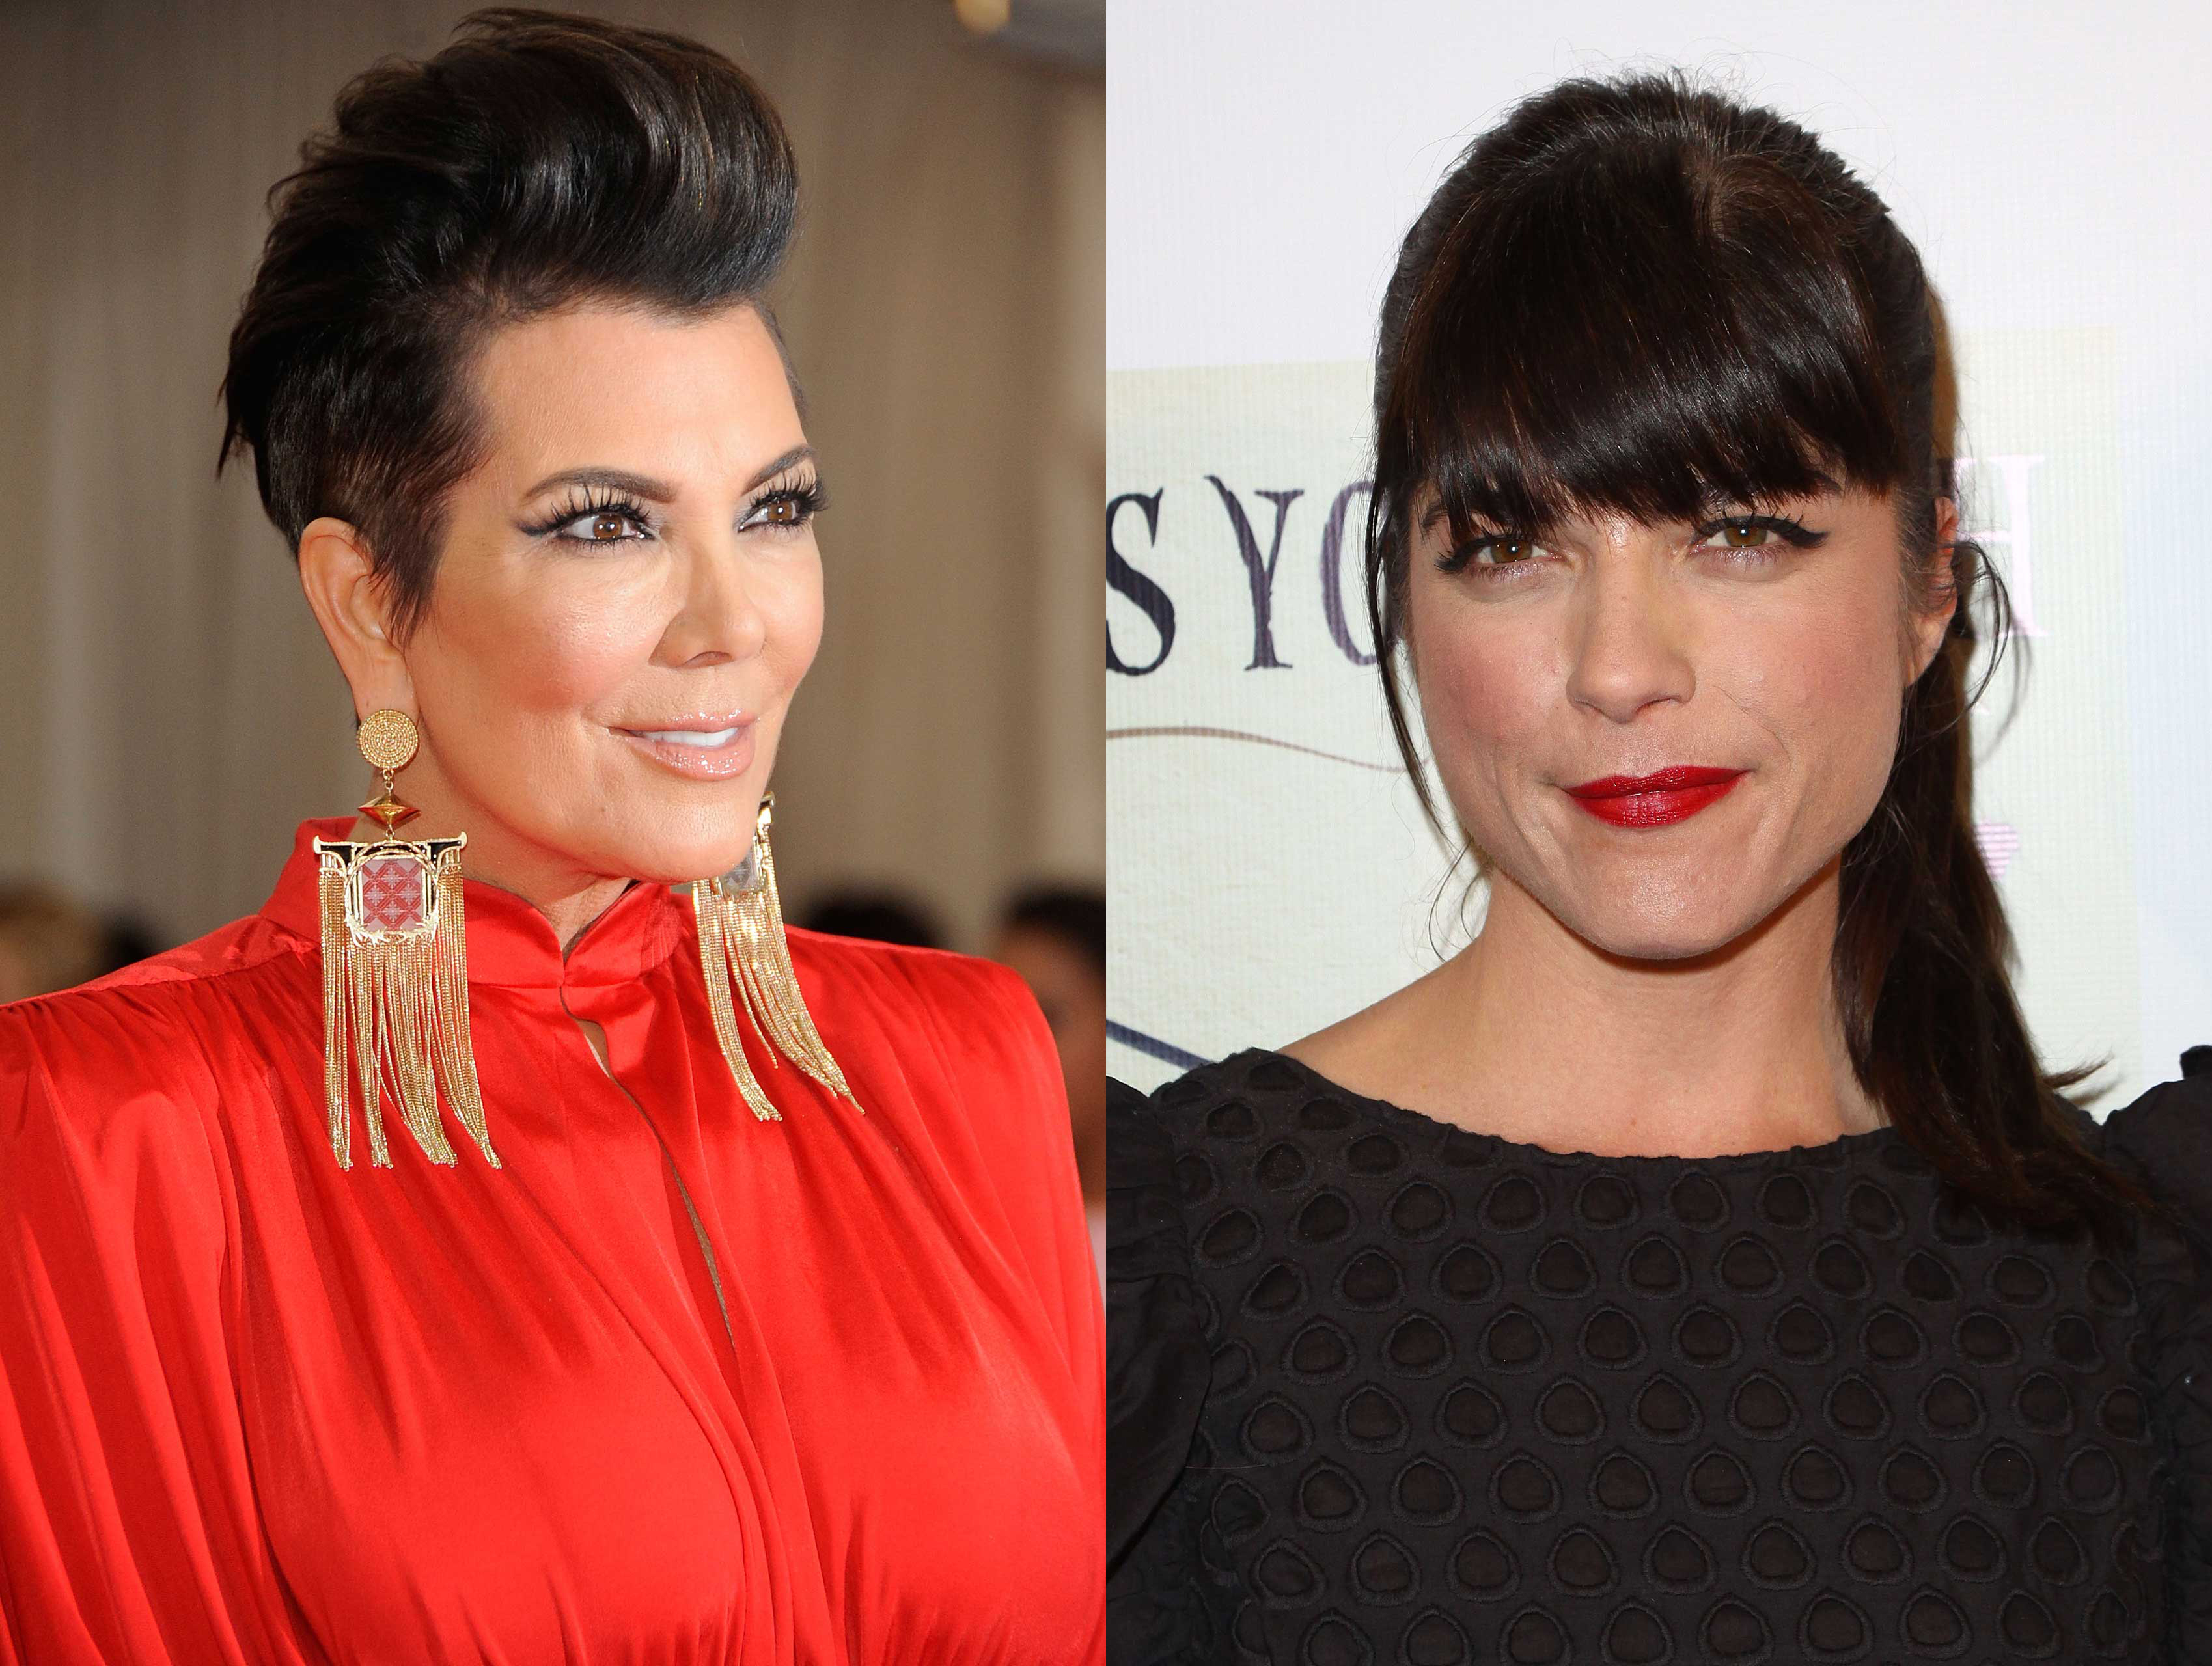 Chris Jenner (L) ; Selma Blair (R) ((L) Rabbani and Solimene—Getty Images; (R) JC Olivera—Getty Images)